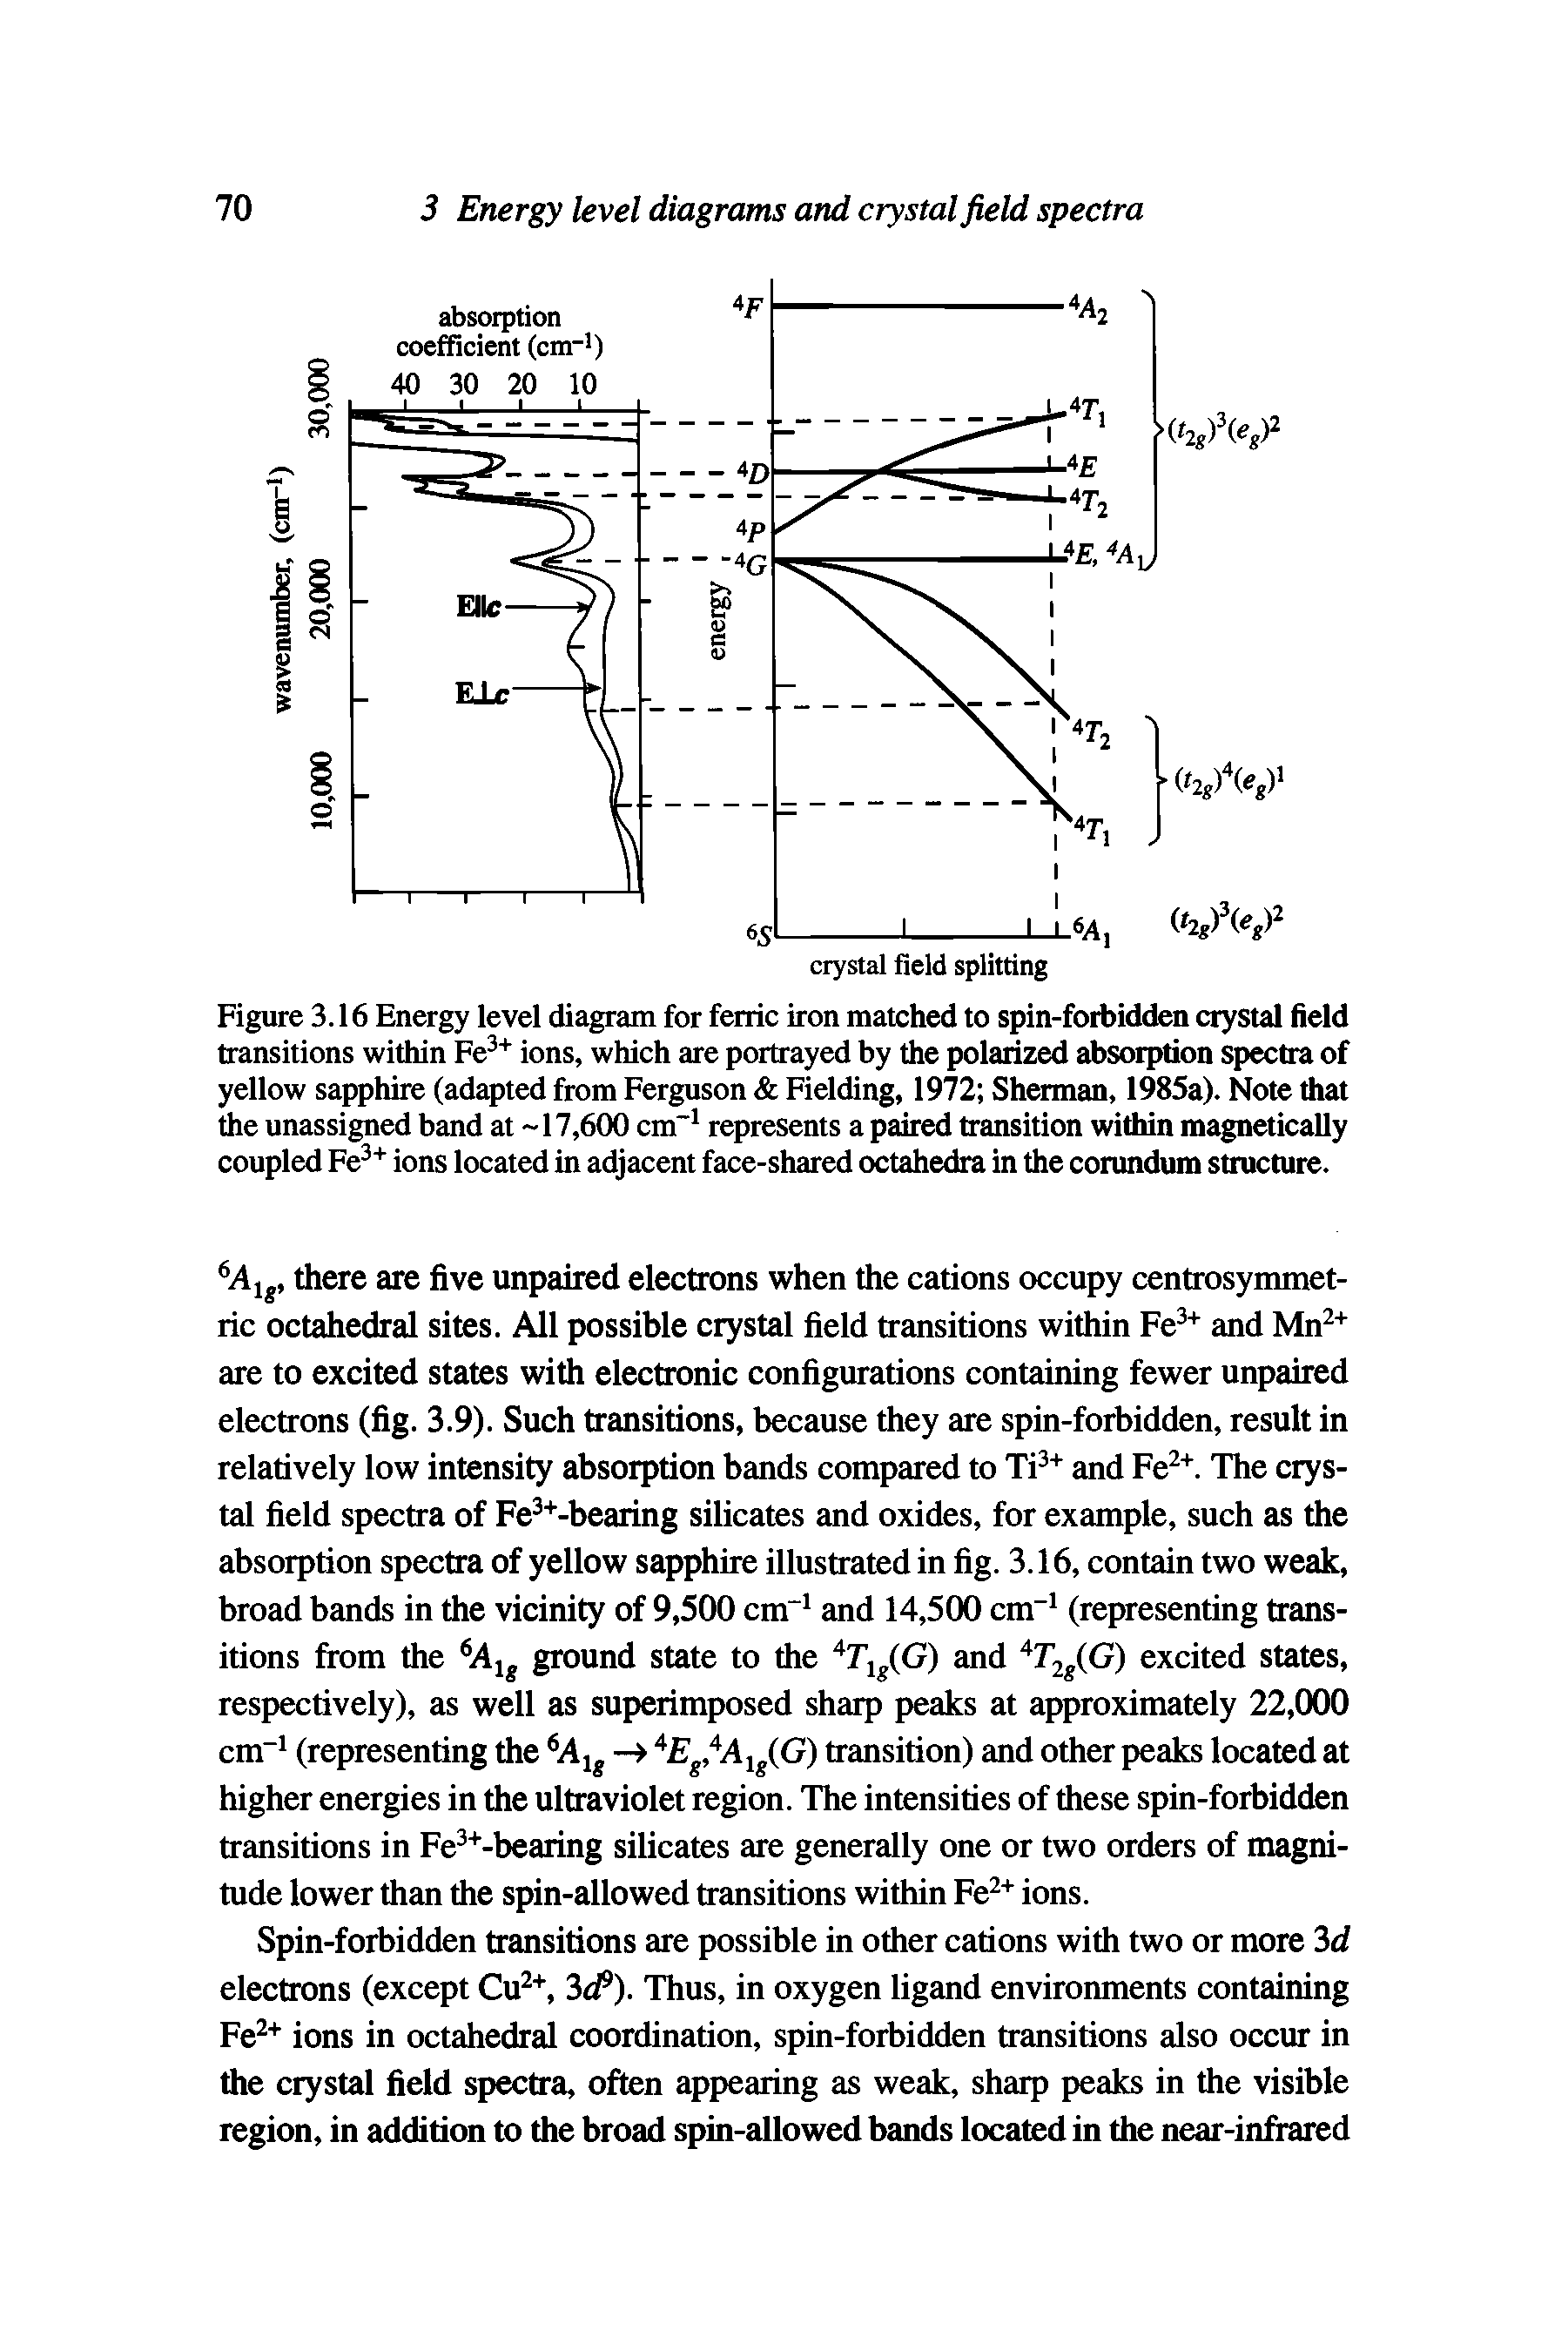 Figure 3.16 Energy level diagram for ferric iron matched to spin-forbidden crystal field transitions within Fe3+ ions, which are portrayed by the polarized absorption spectra of yellow sapphire (adapted from Ferguson Fielding, 1972 Sherman, 1985a). Note that the unassigned band at -17,600 cm-1 represents a paired transition within magnetically coupled Fe3+ ions located in adjacent face-shared octahedra in the corundum structure.